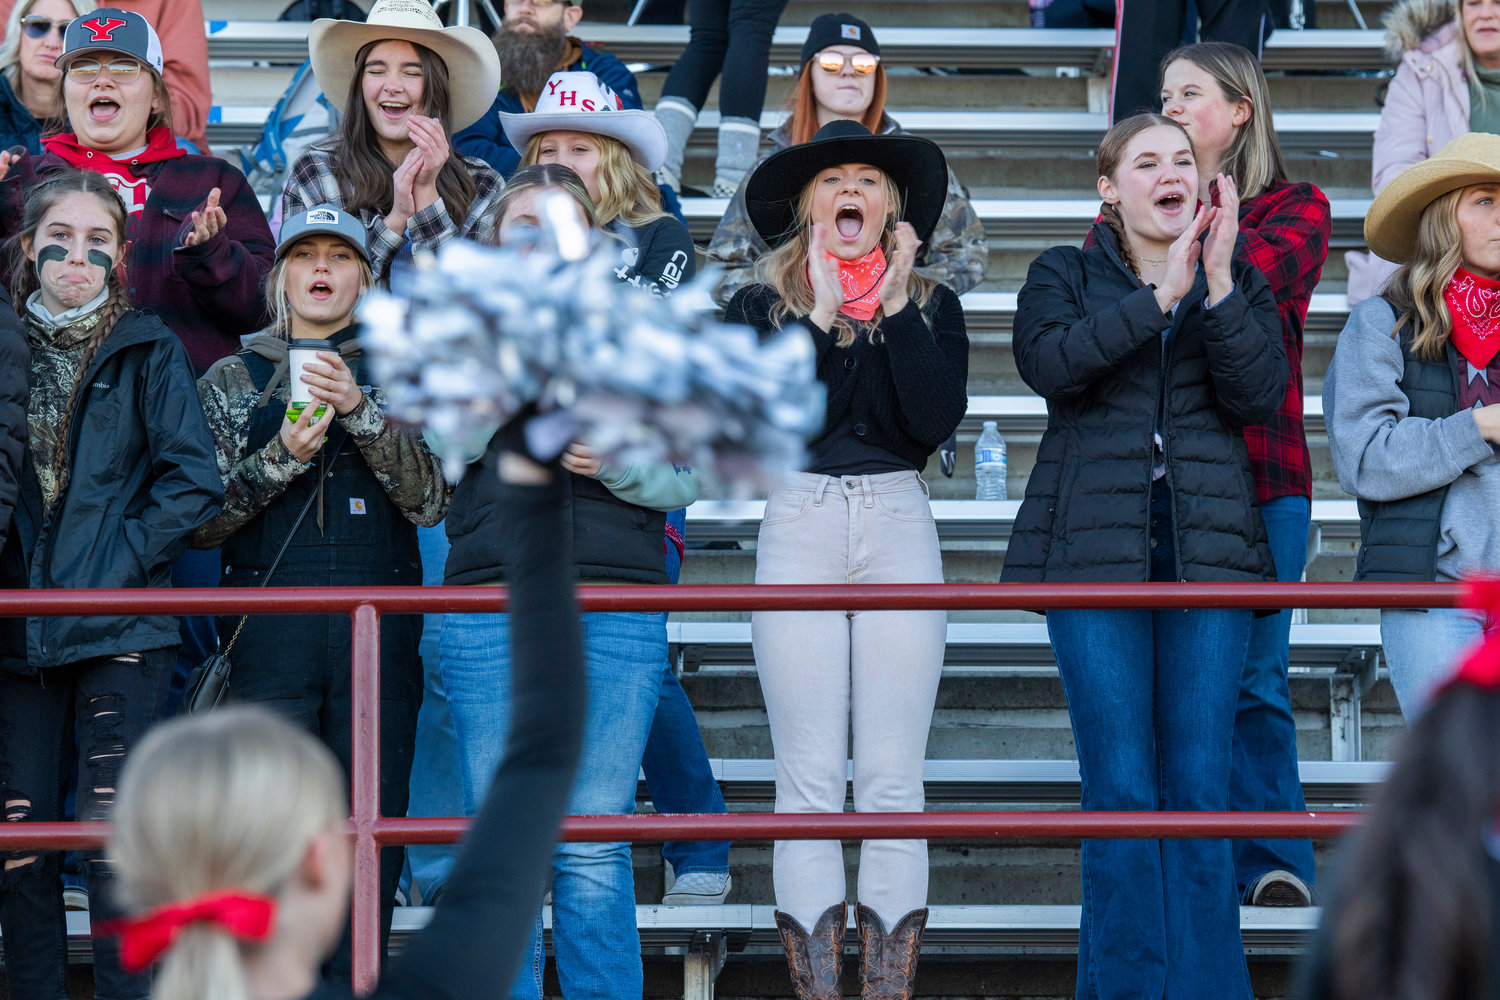 Tornado fans react during a football game on Saturday in Yelm.